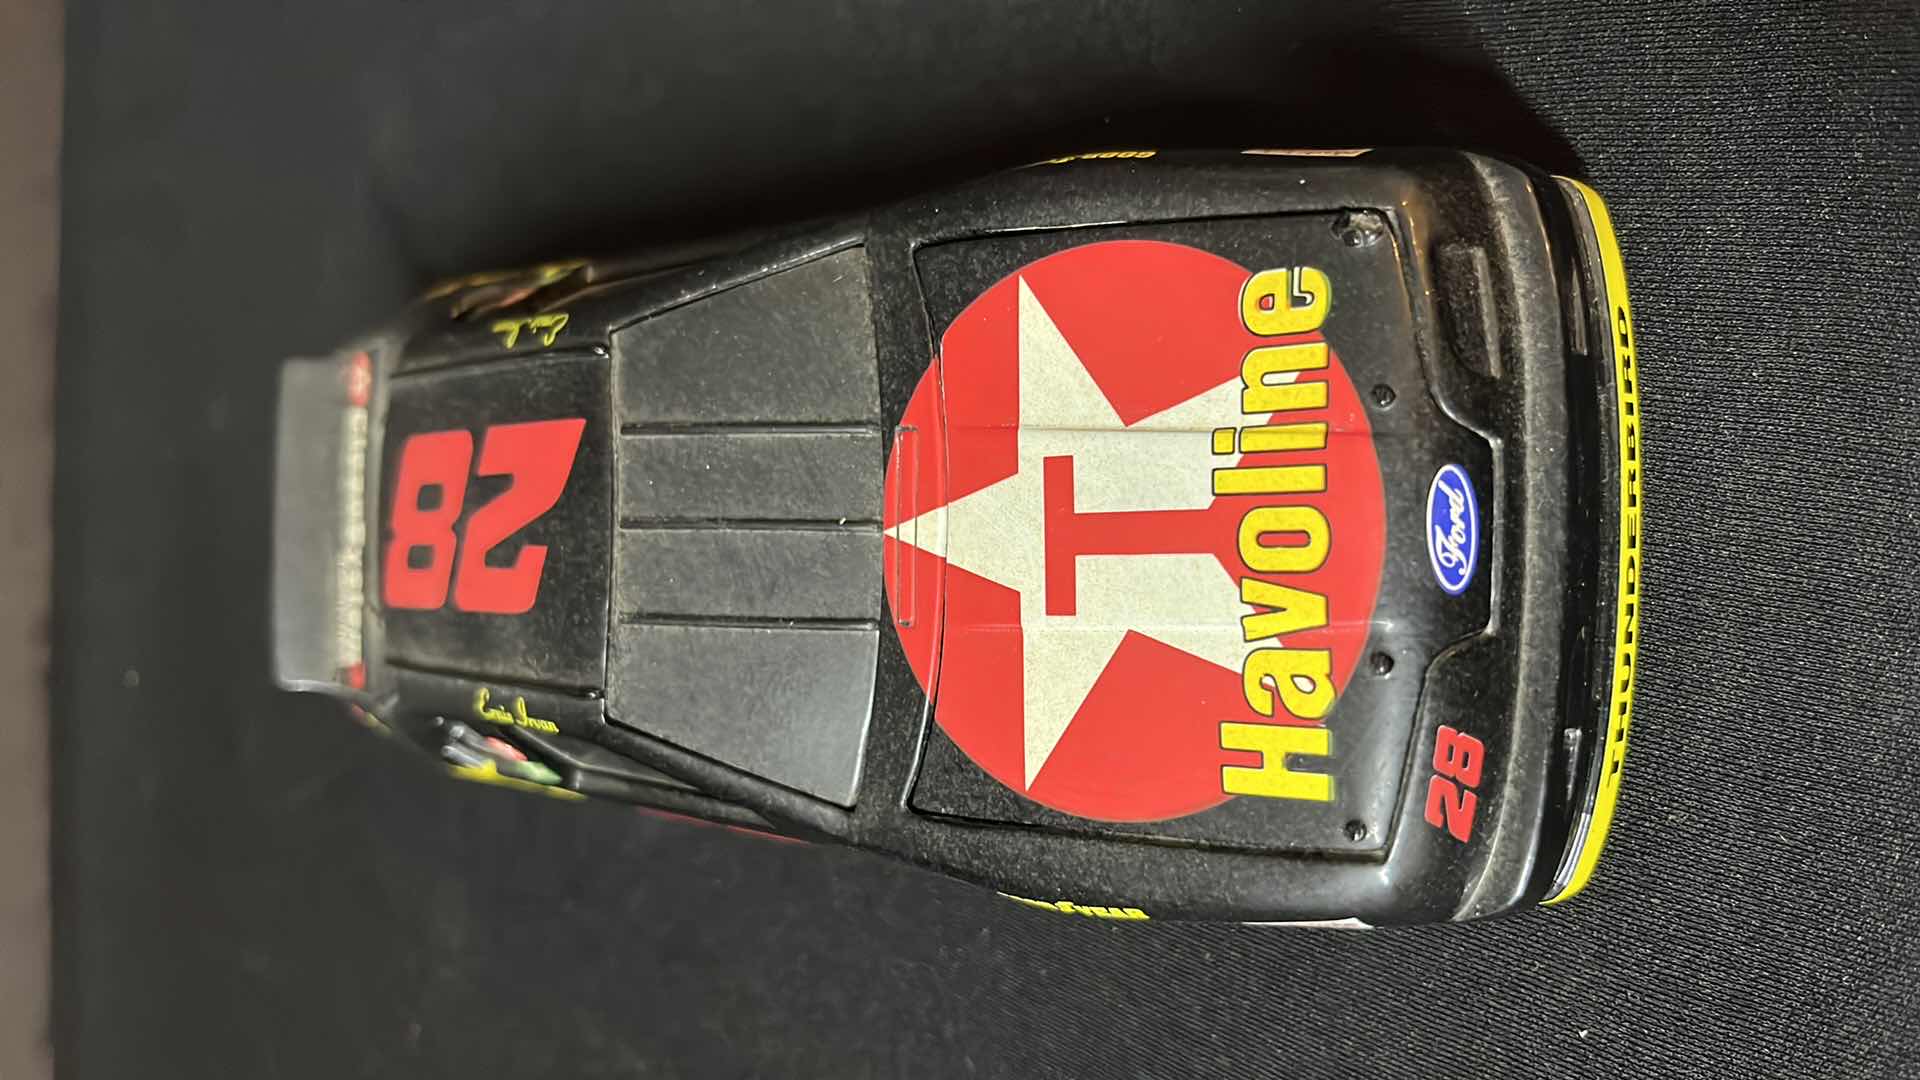 Photo 4 of RACING COLLECTIBLES TEXACO HAVOLINE RACING DIE-CAST BANK W KEY, 1994 FORD THUNDERBIRD COLLECTORS EDITION (STOCK NO 249401121-2)